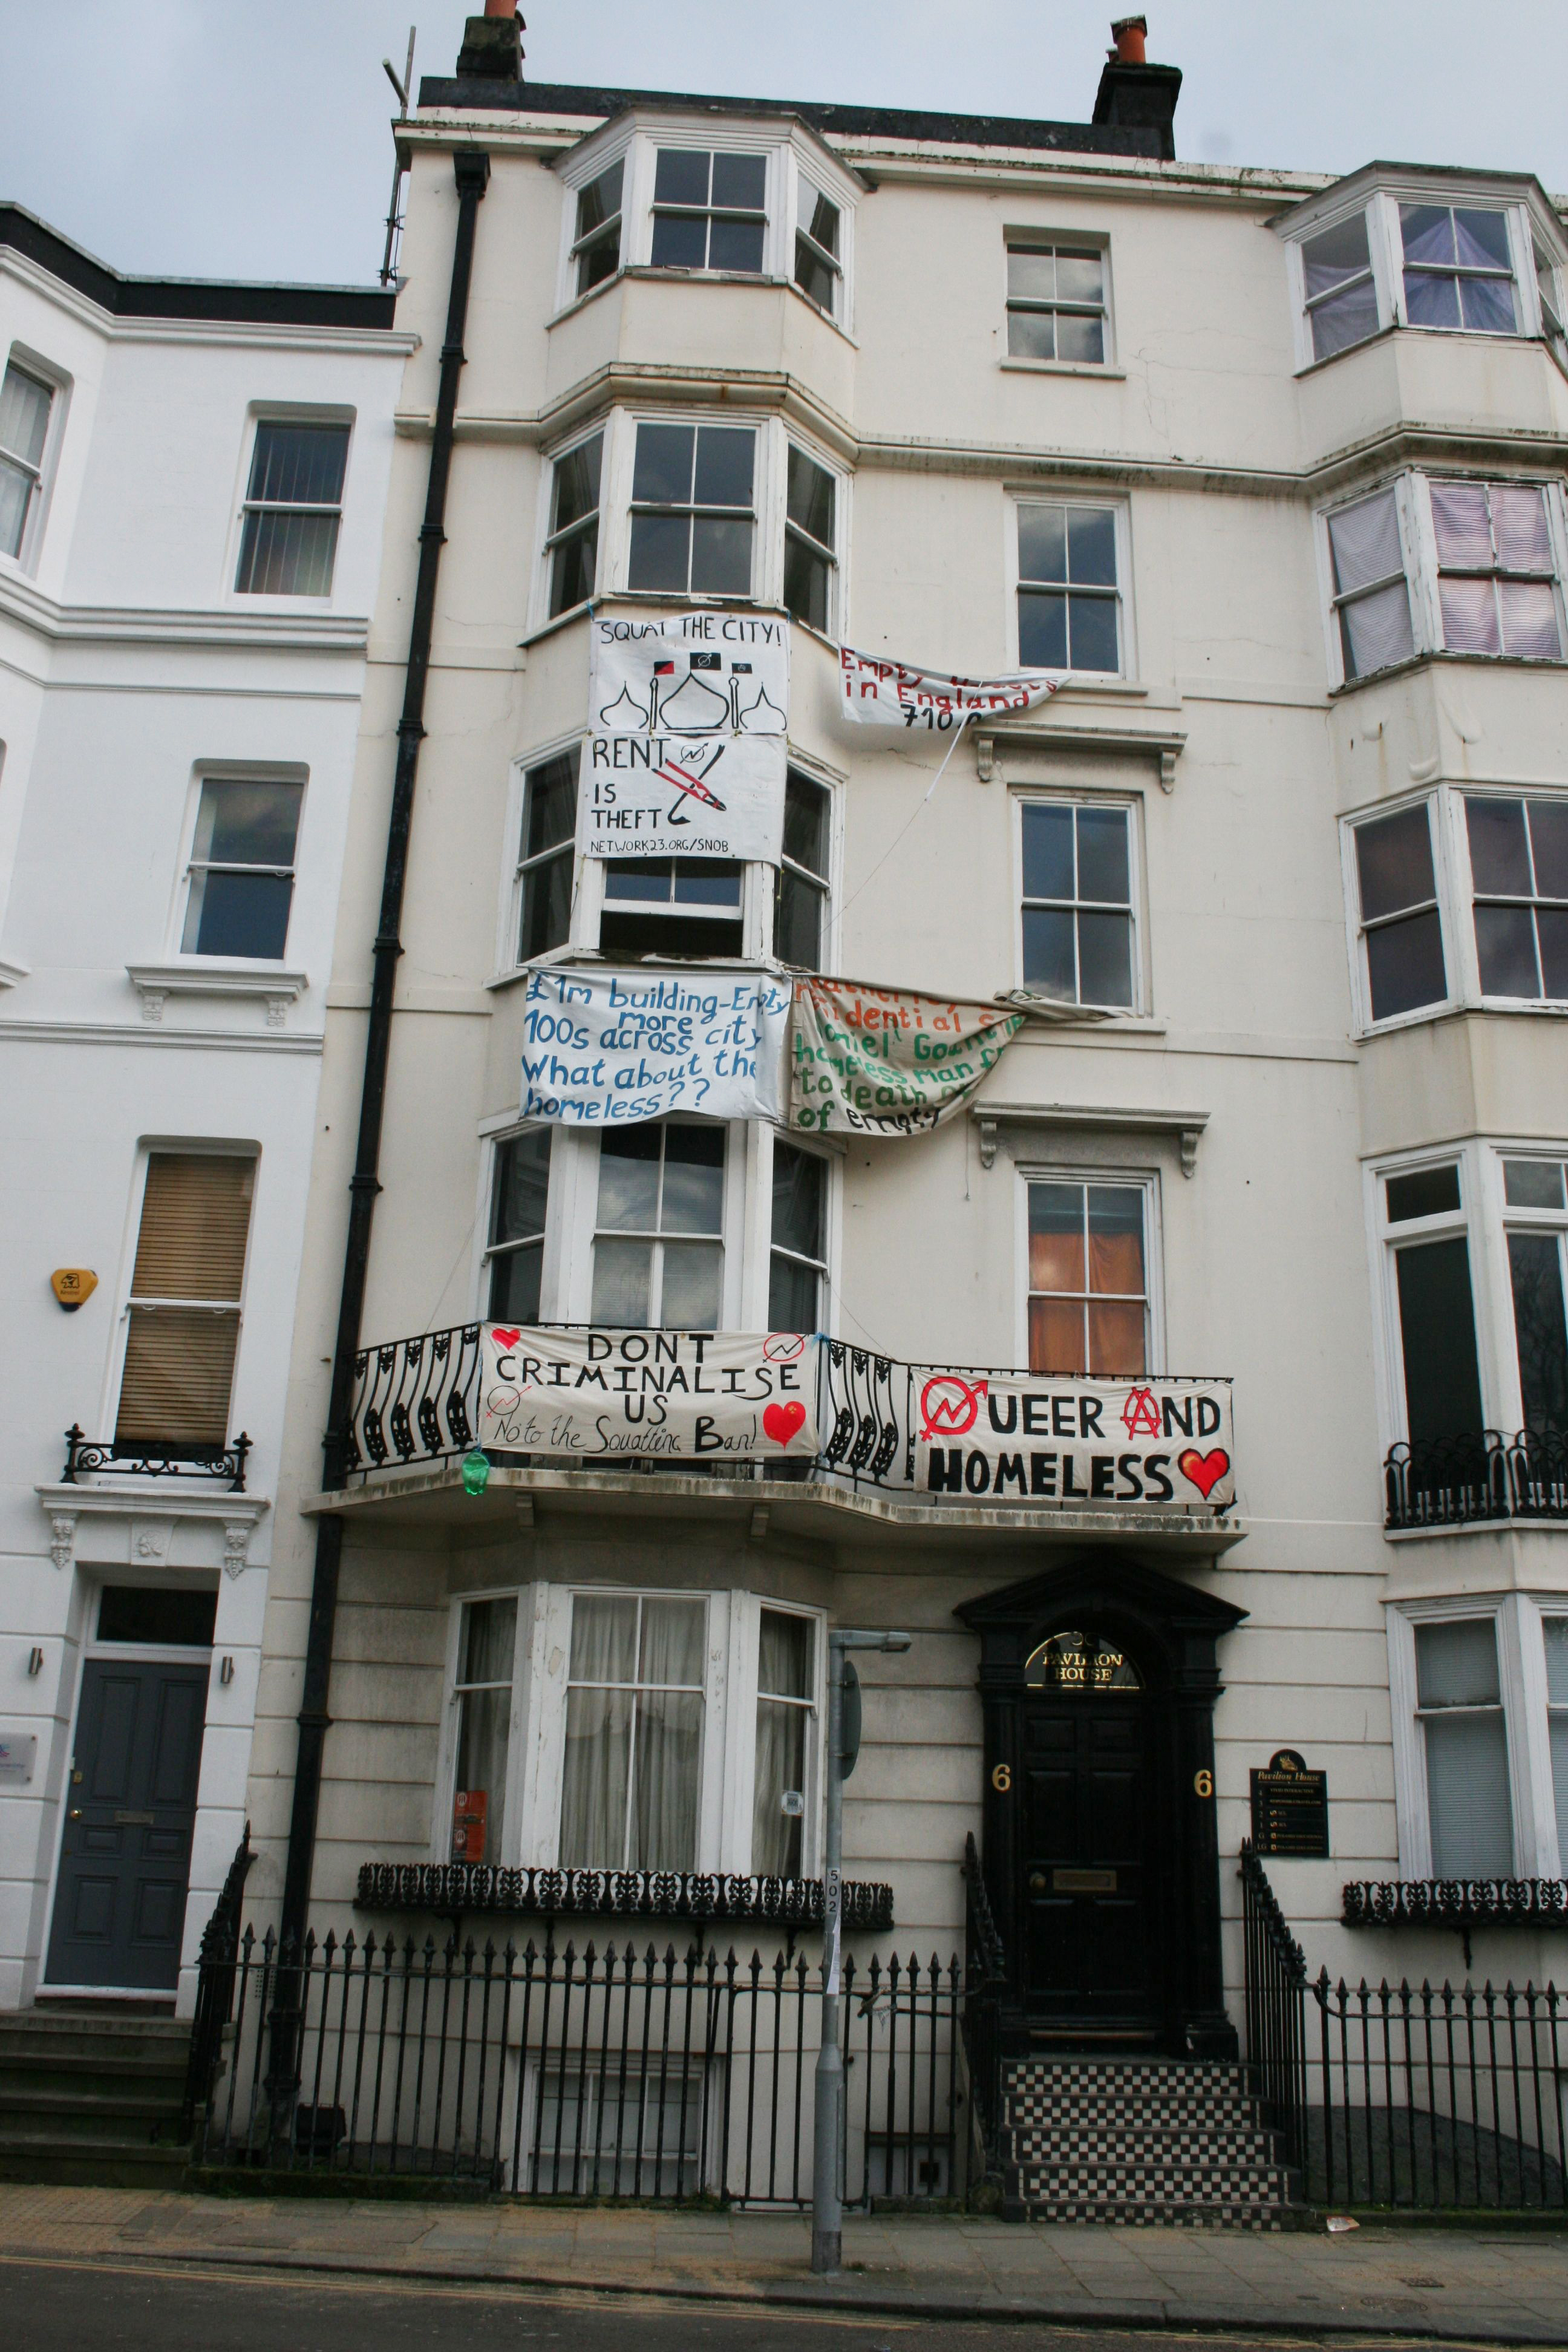 Queer squatter protest in Brighton, 2013. Credit: Lesley Wood.